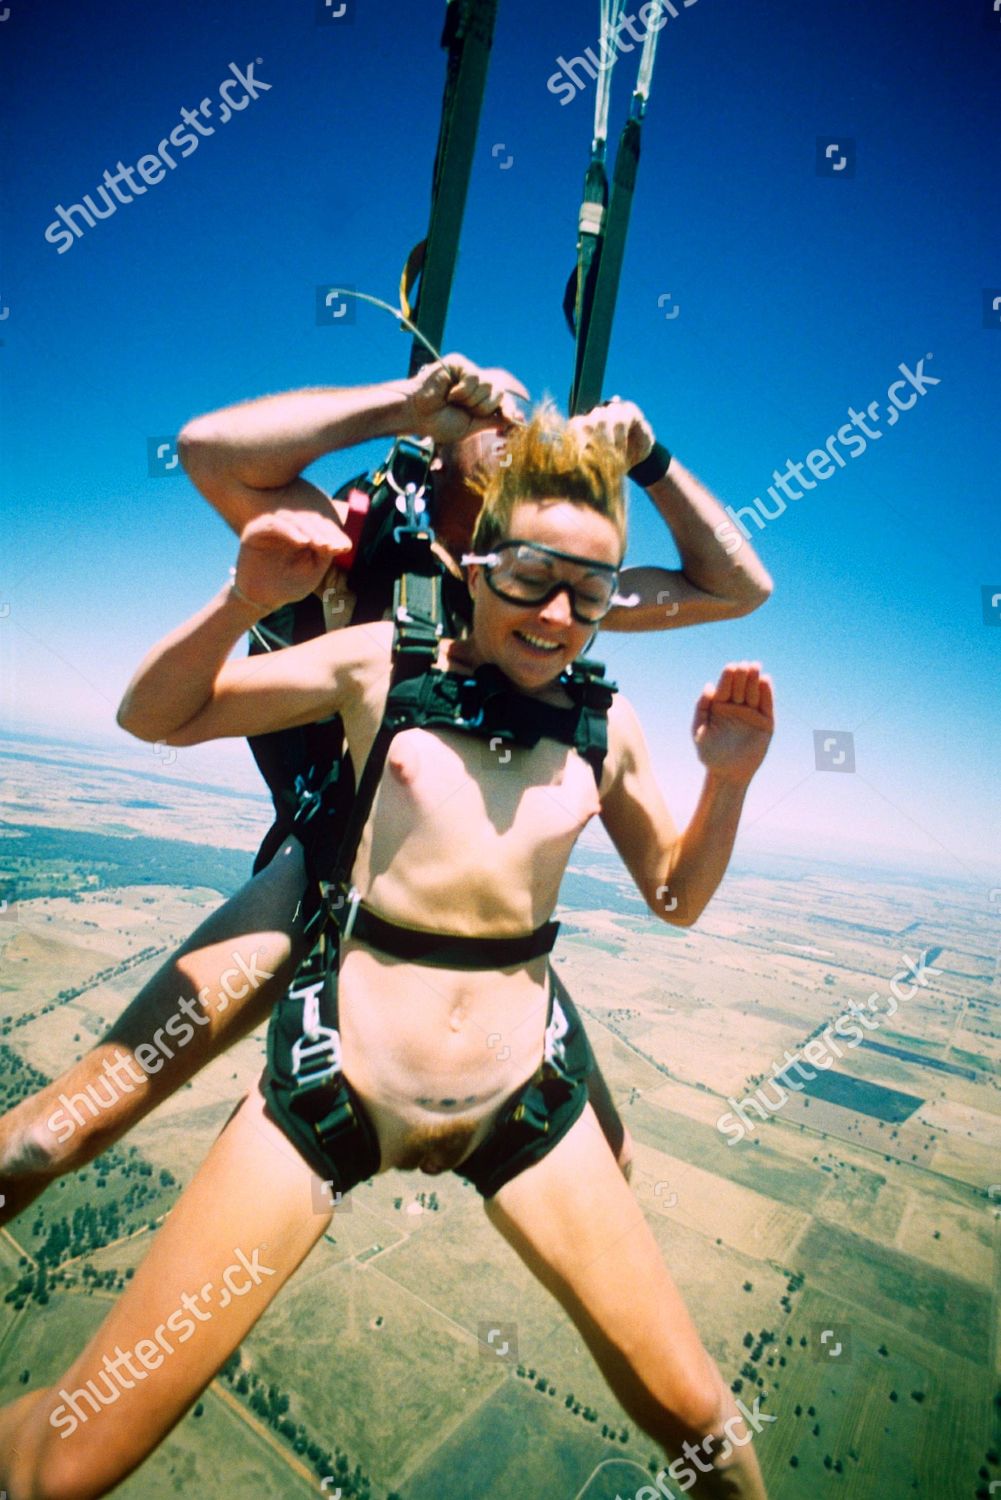 Porn Pictures Skydiving German